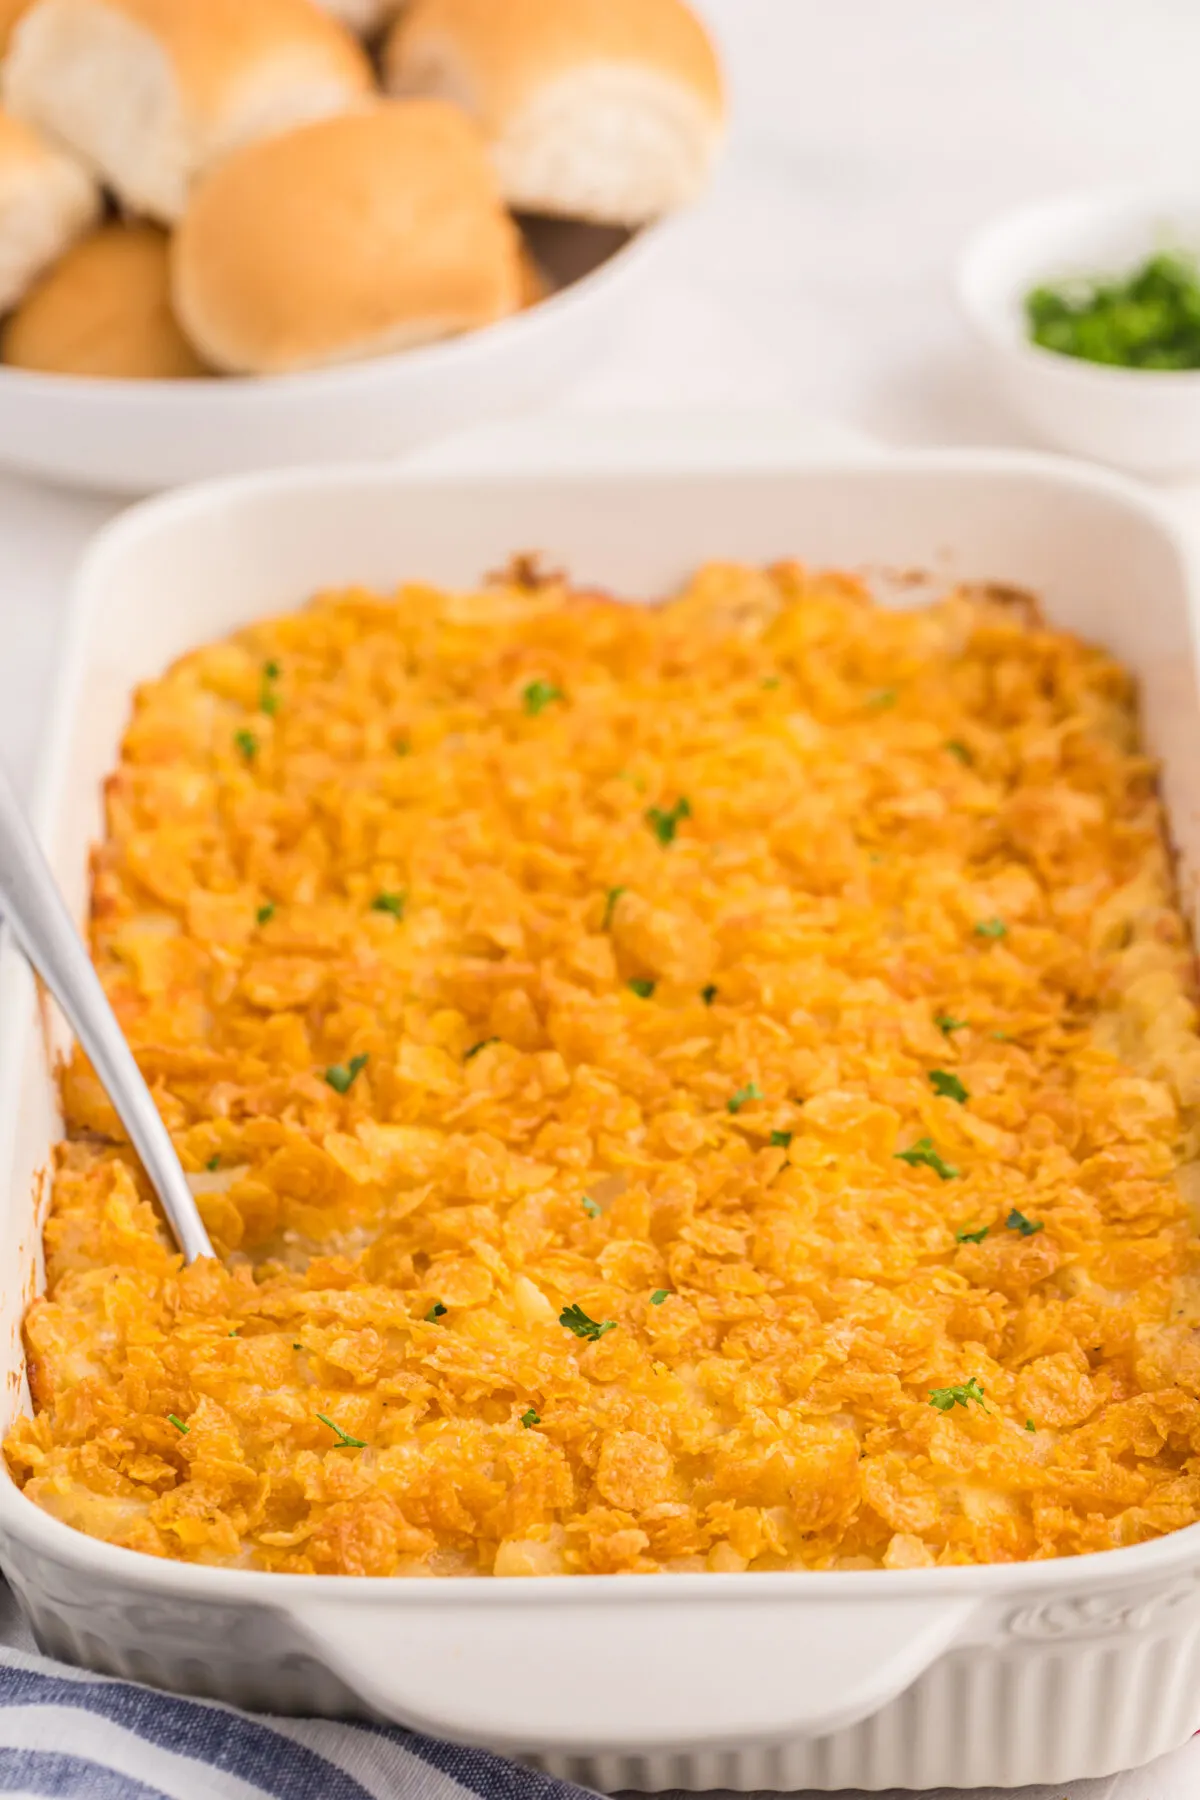 This is the best funeral potatoes recipe I've ever had, it's creamy and delicious - a great side dish for potlucks and family dinners.